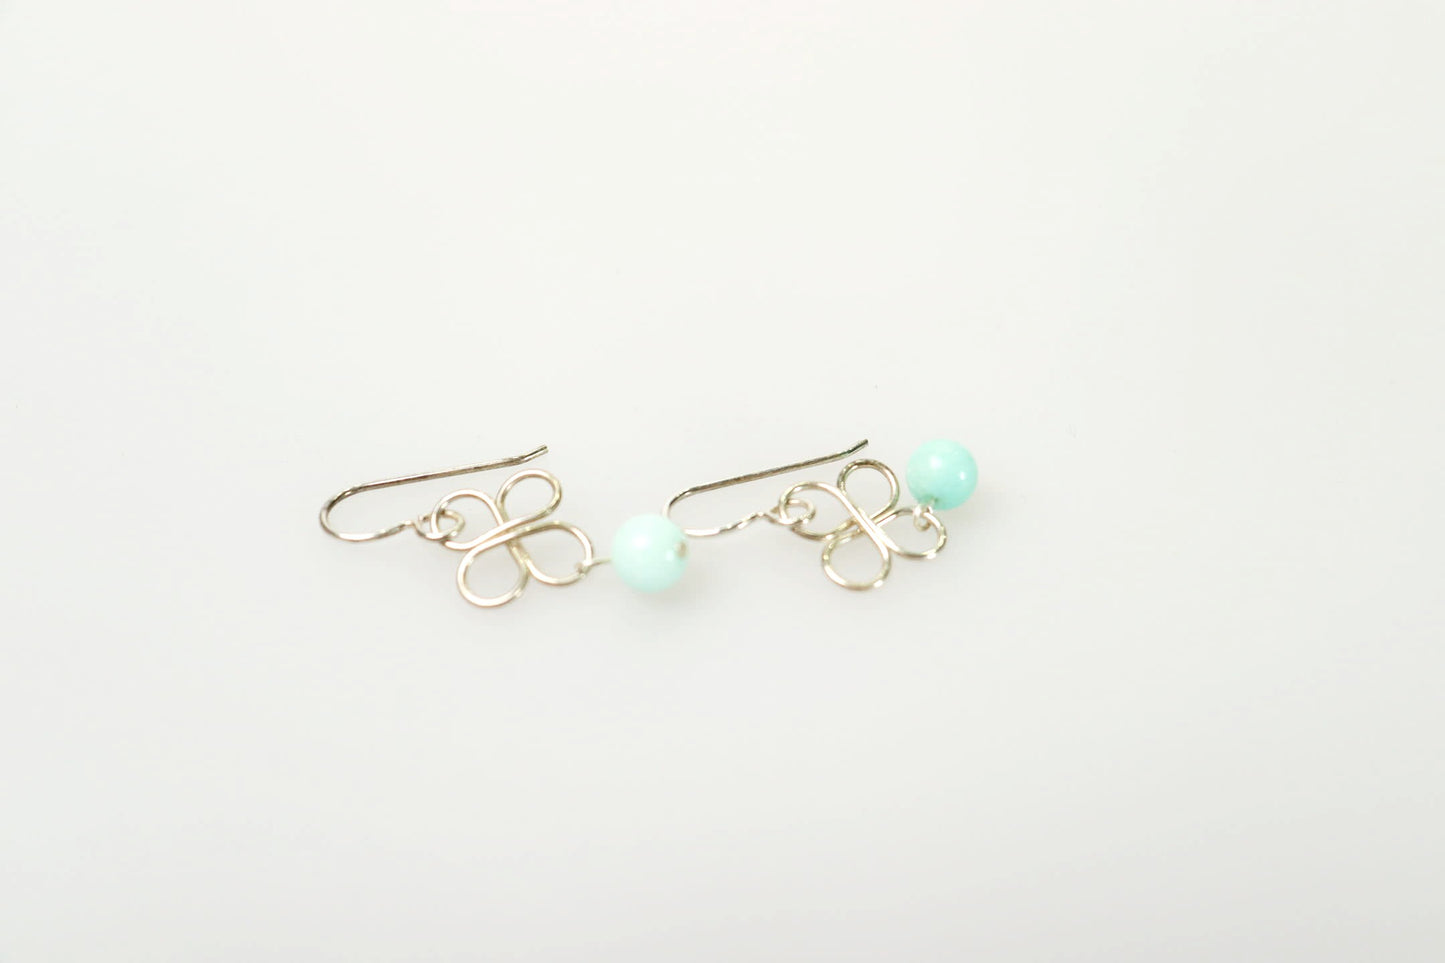 Clover Sterling Silver and Green Chalcedony Earrings